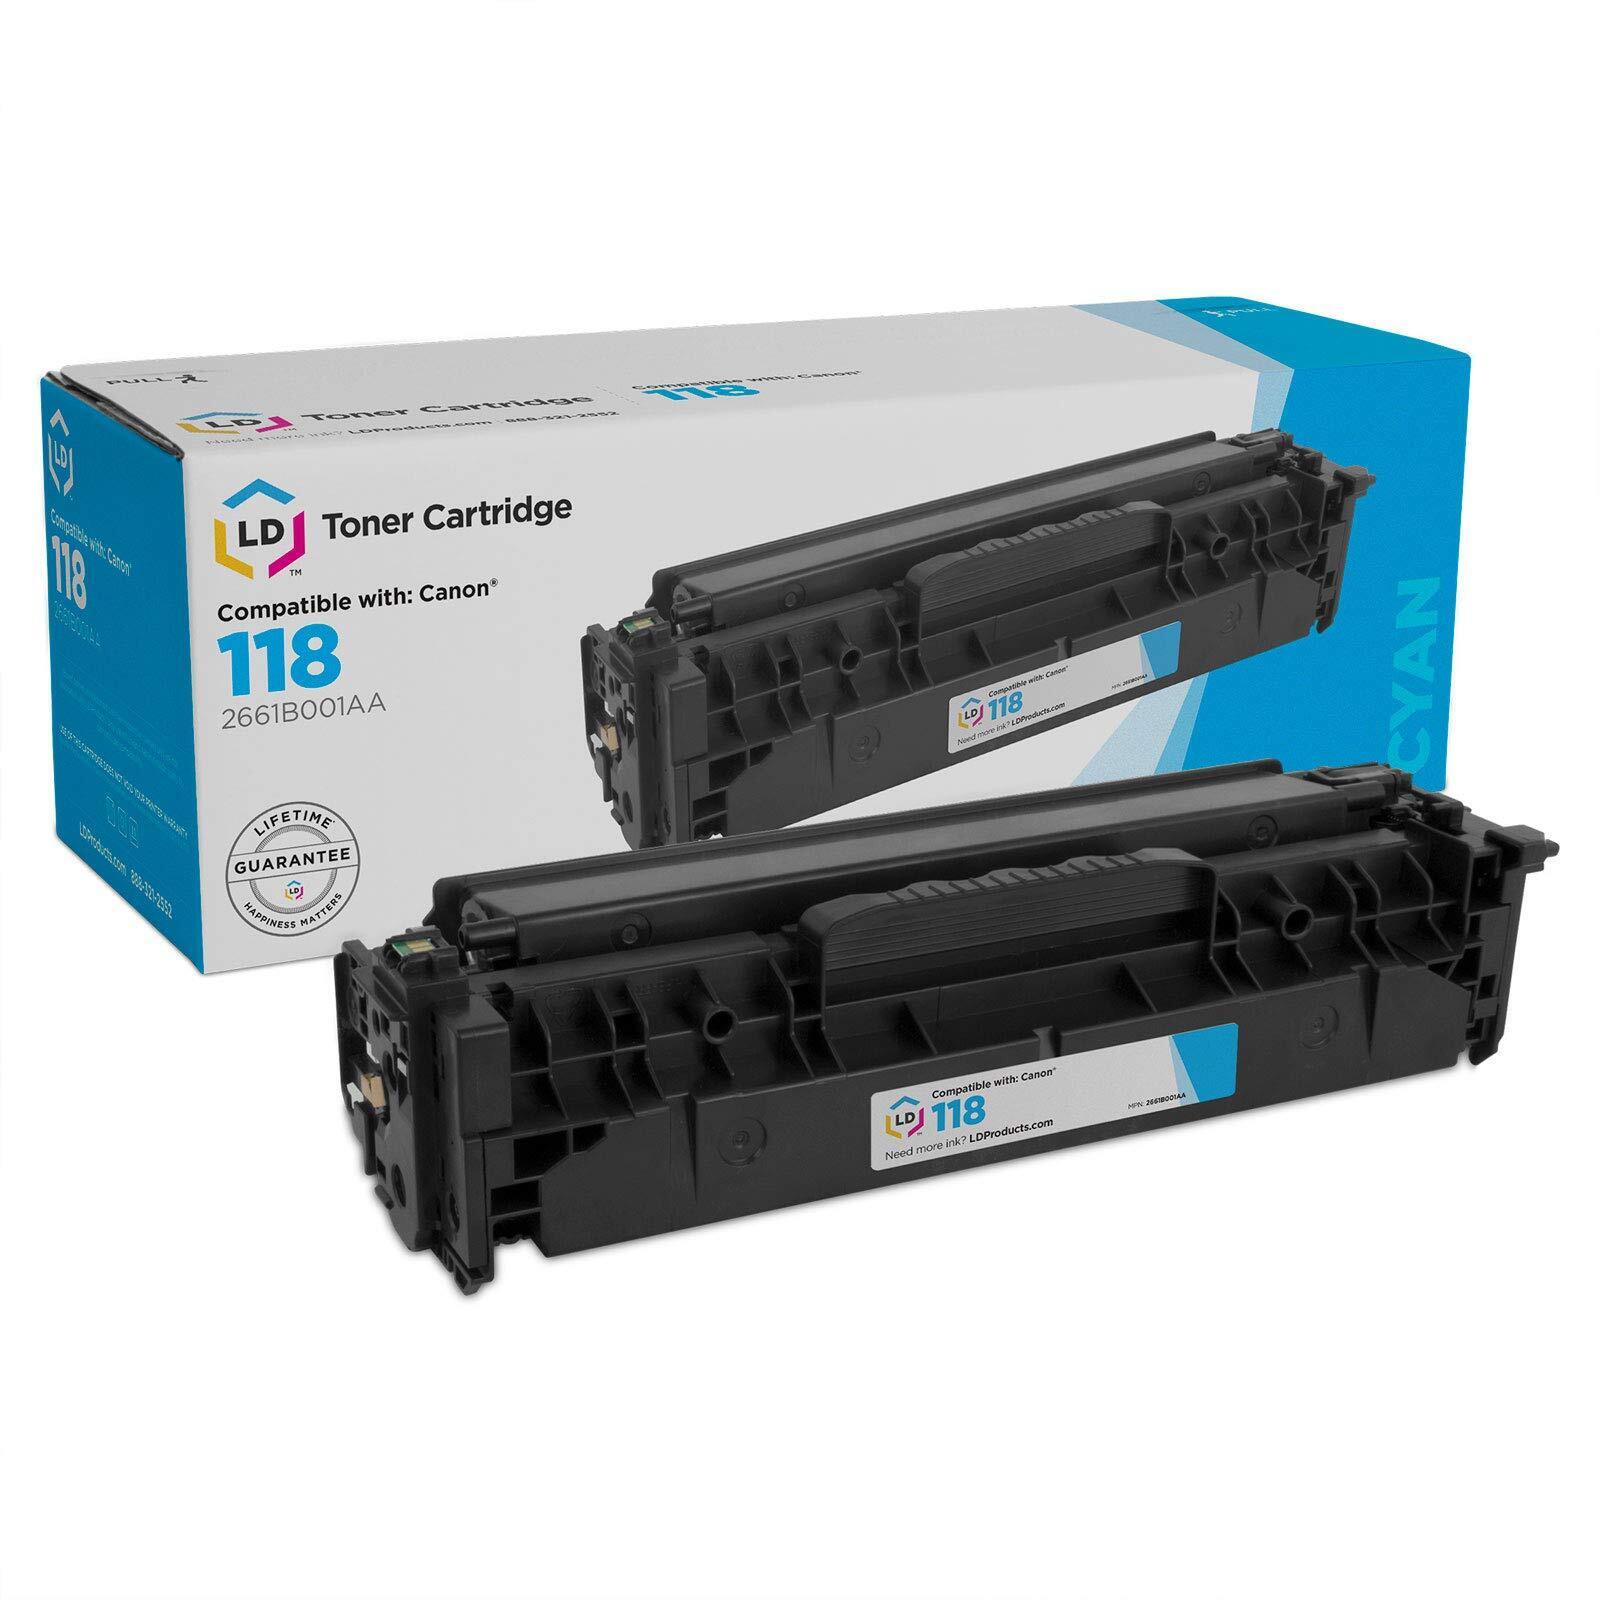 LD Products Reman Compatible Toner Replacement for Canon 118 (Cyan)